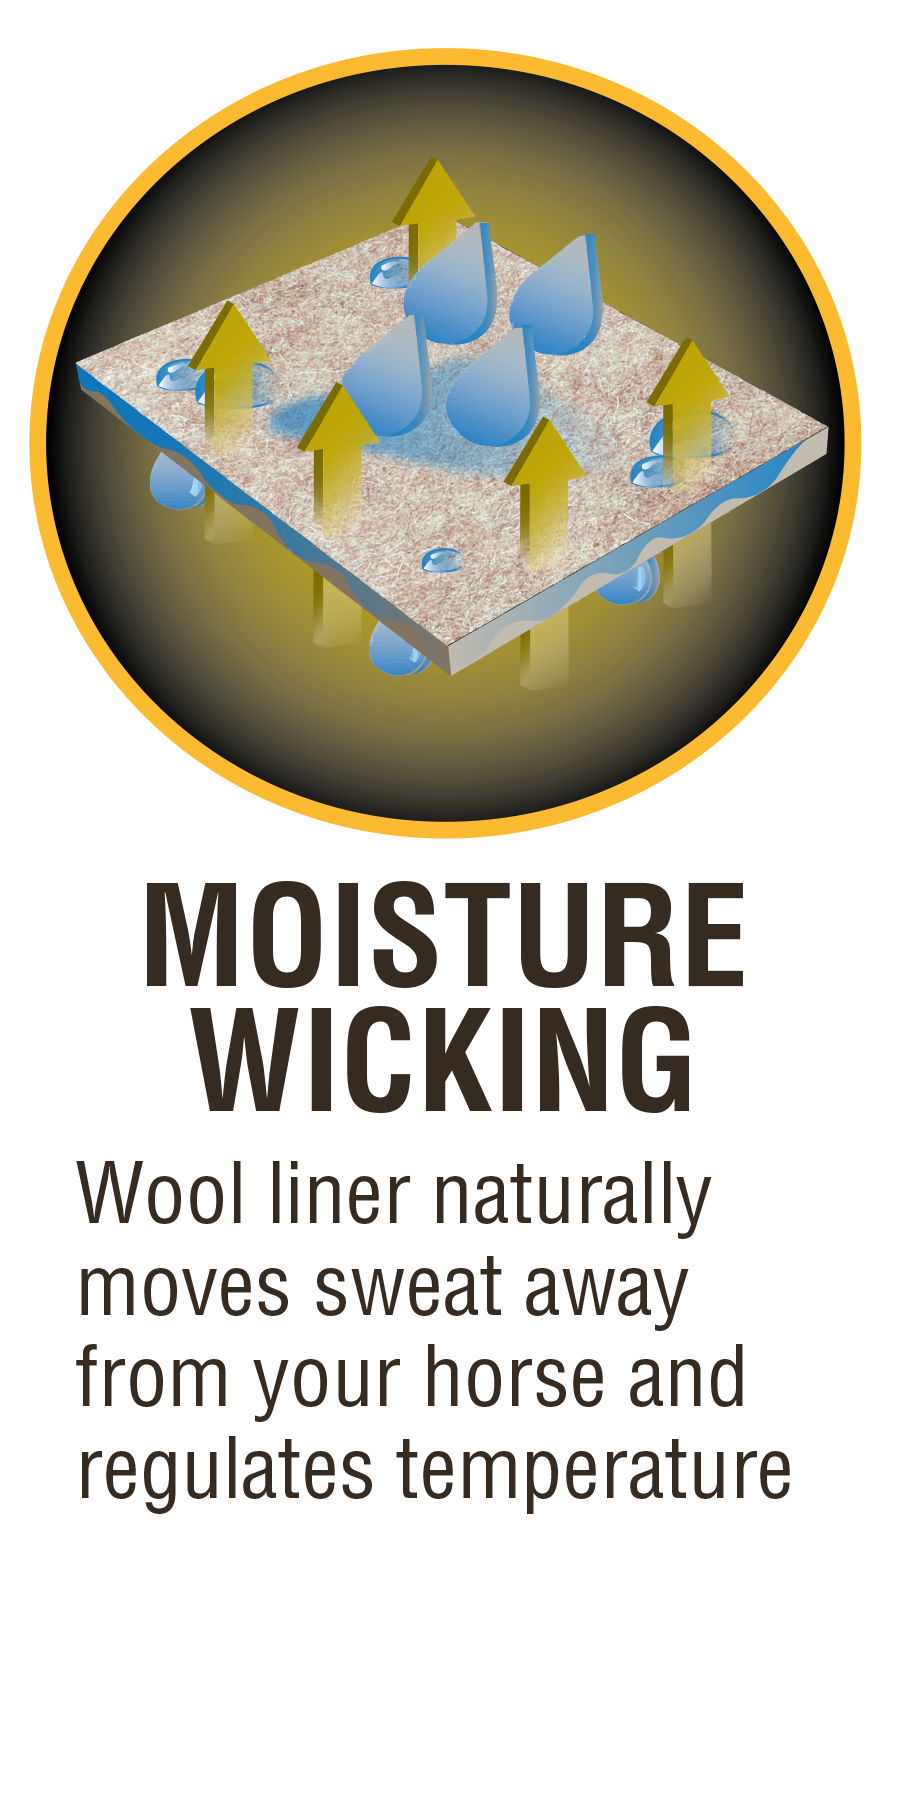 Moisture Wicking Wool liner naturally moves sweat away from your horse and regulates temprature